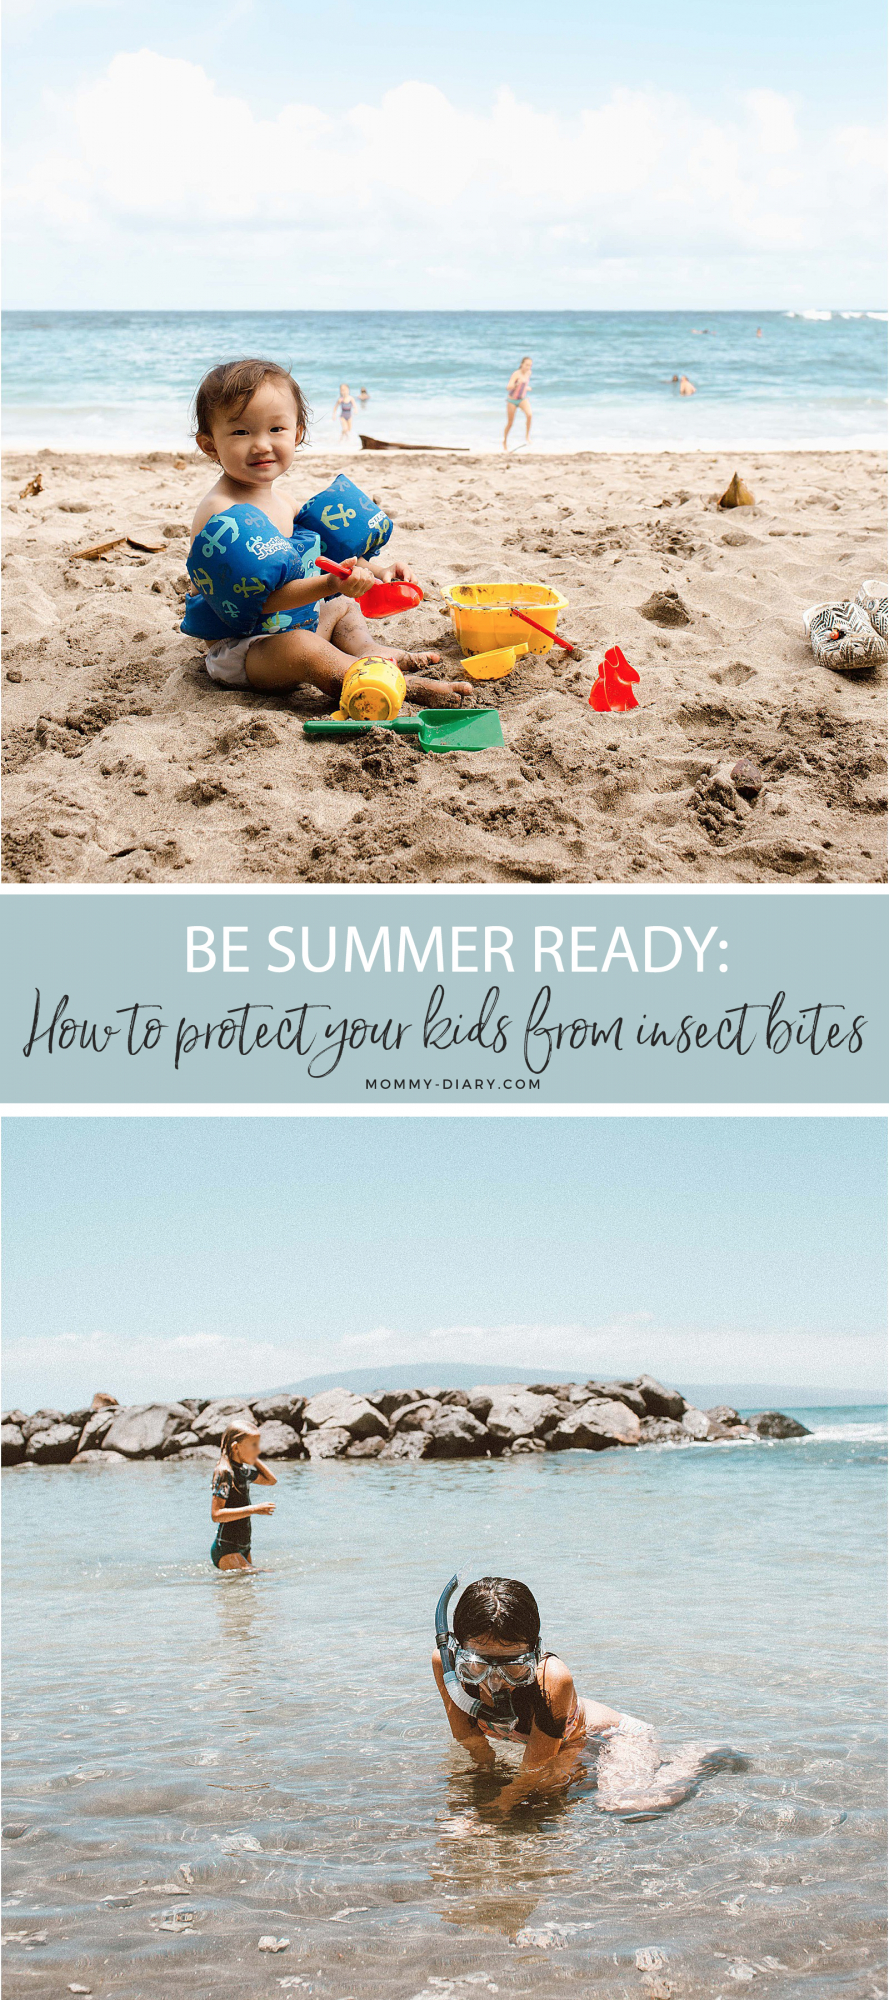 How to Protect Your Kids Against Insect Bites